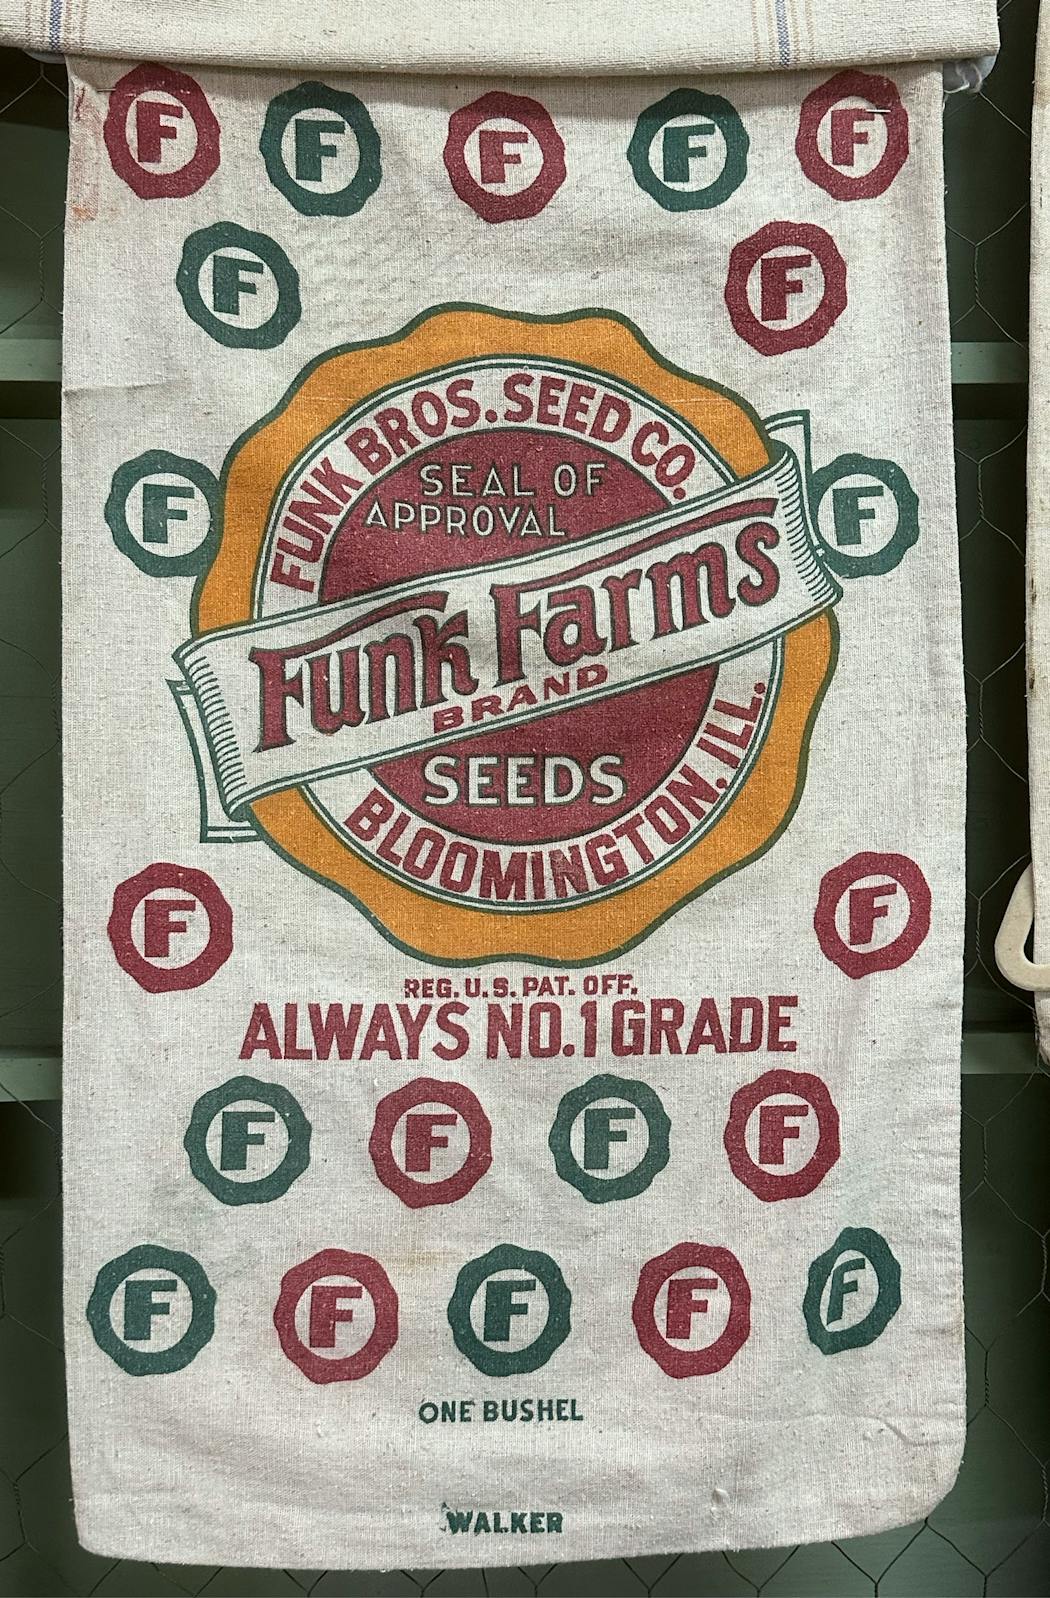 Funk Seeds, courtesy Ron Kelsey collection